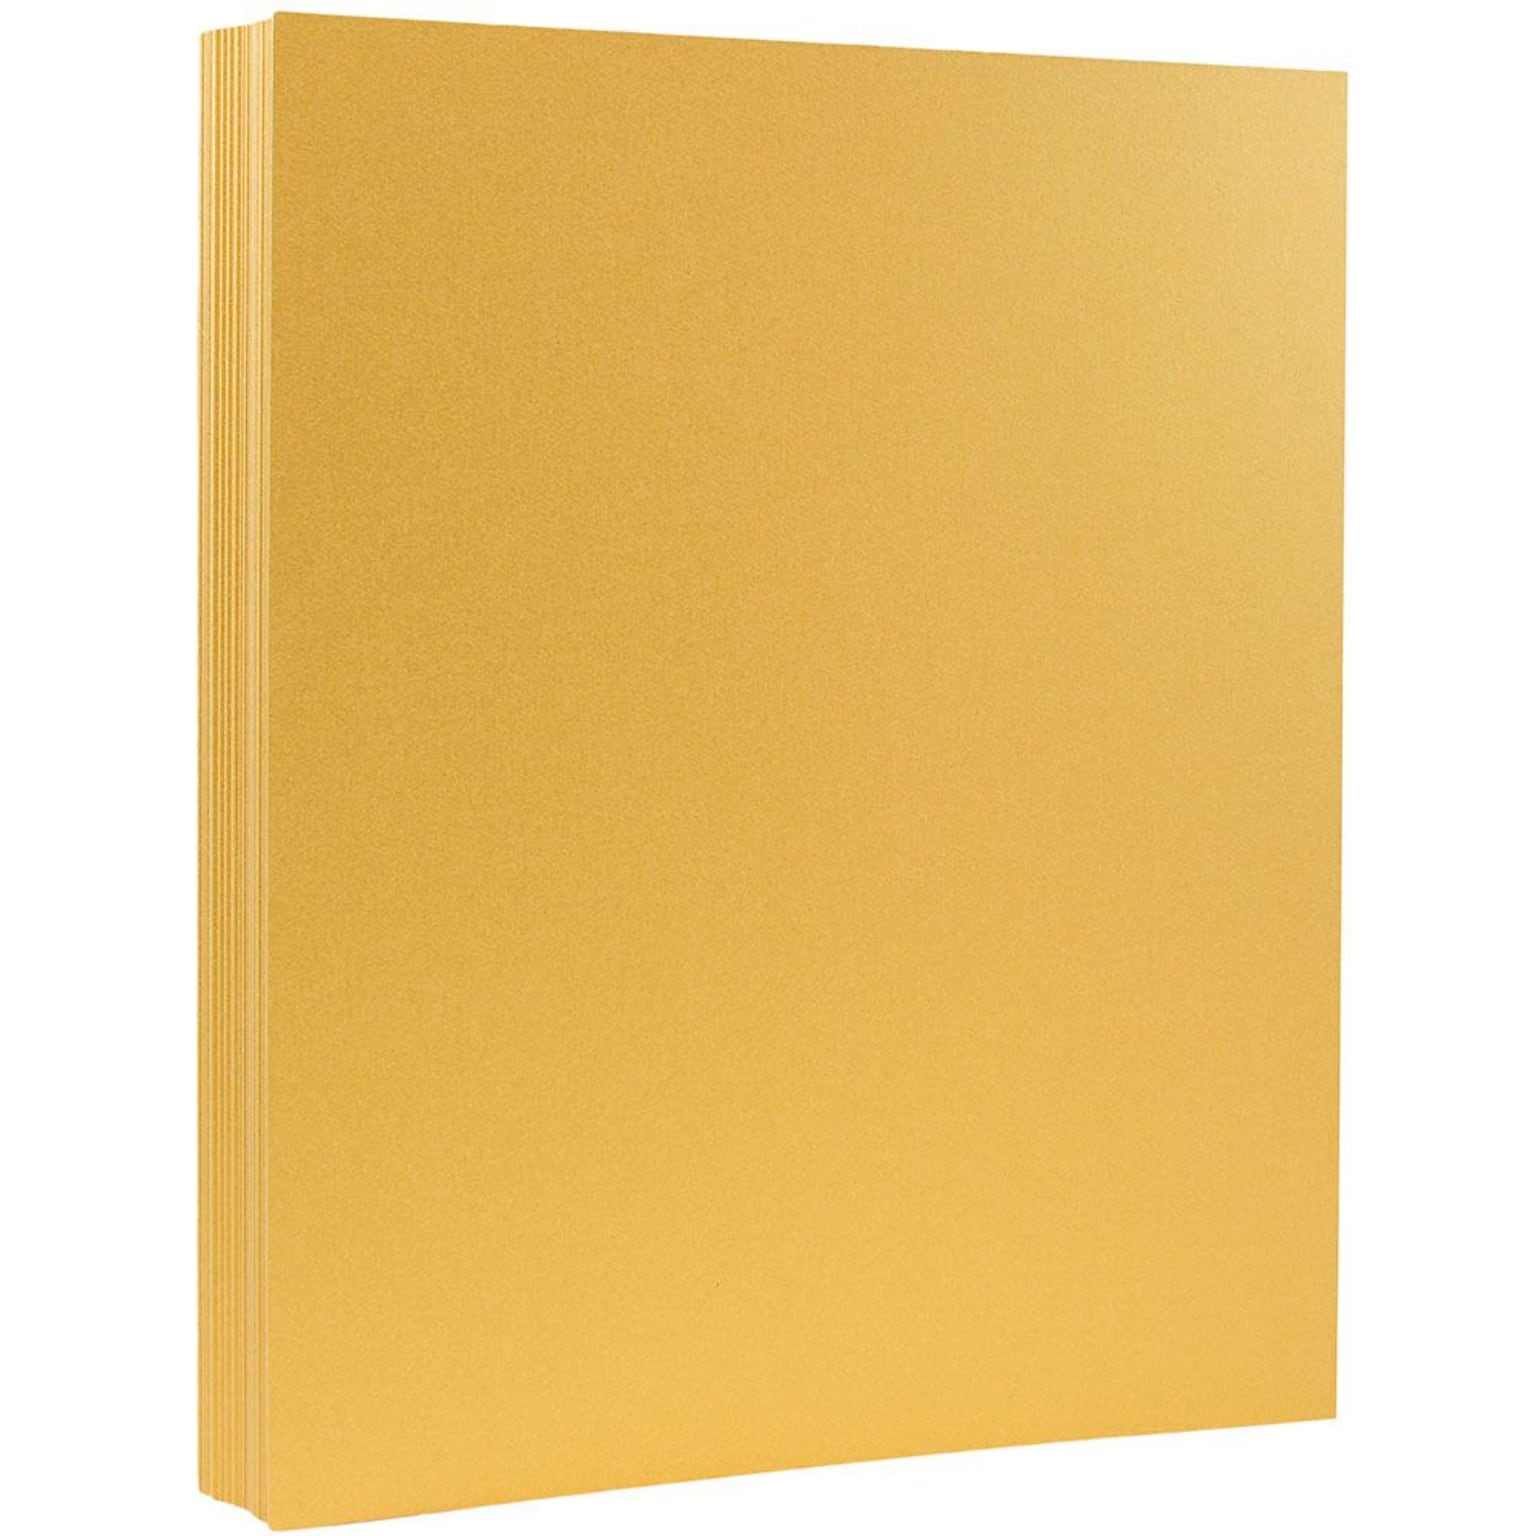 JAM Paper Metallic Colored Paper, 32 lbs., 8.5 x 11, Gold Stardream, 25 Sheets/Pack (173SD8511GO120B)